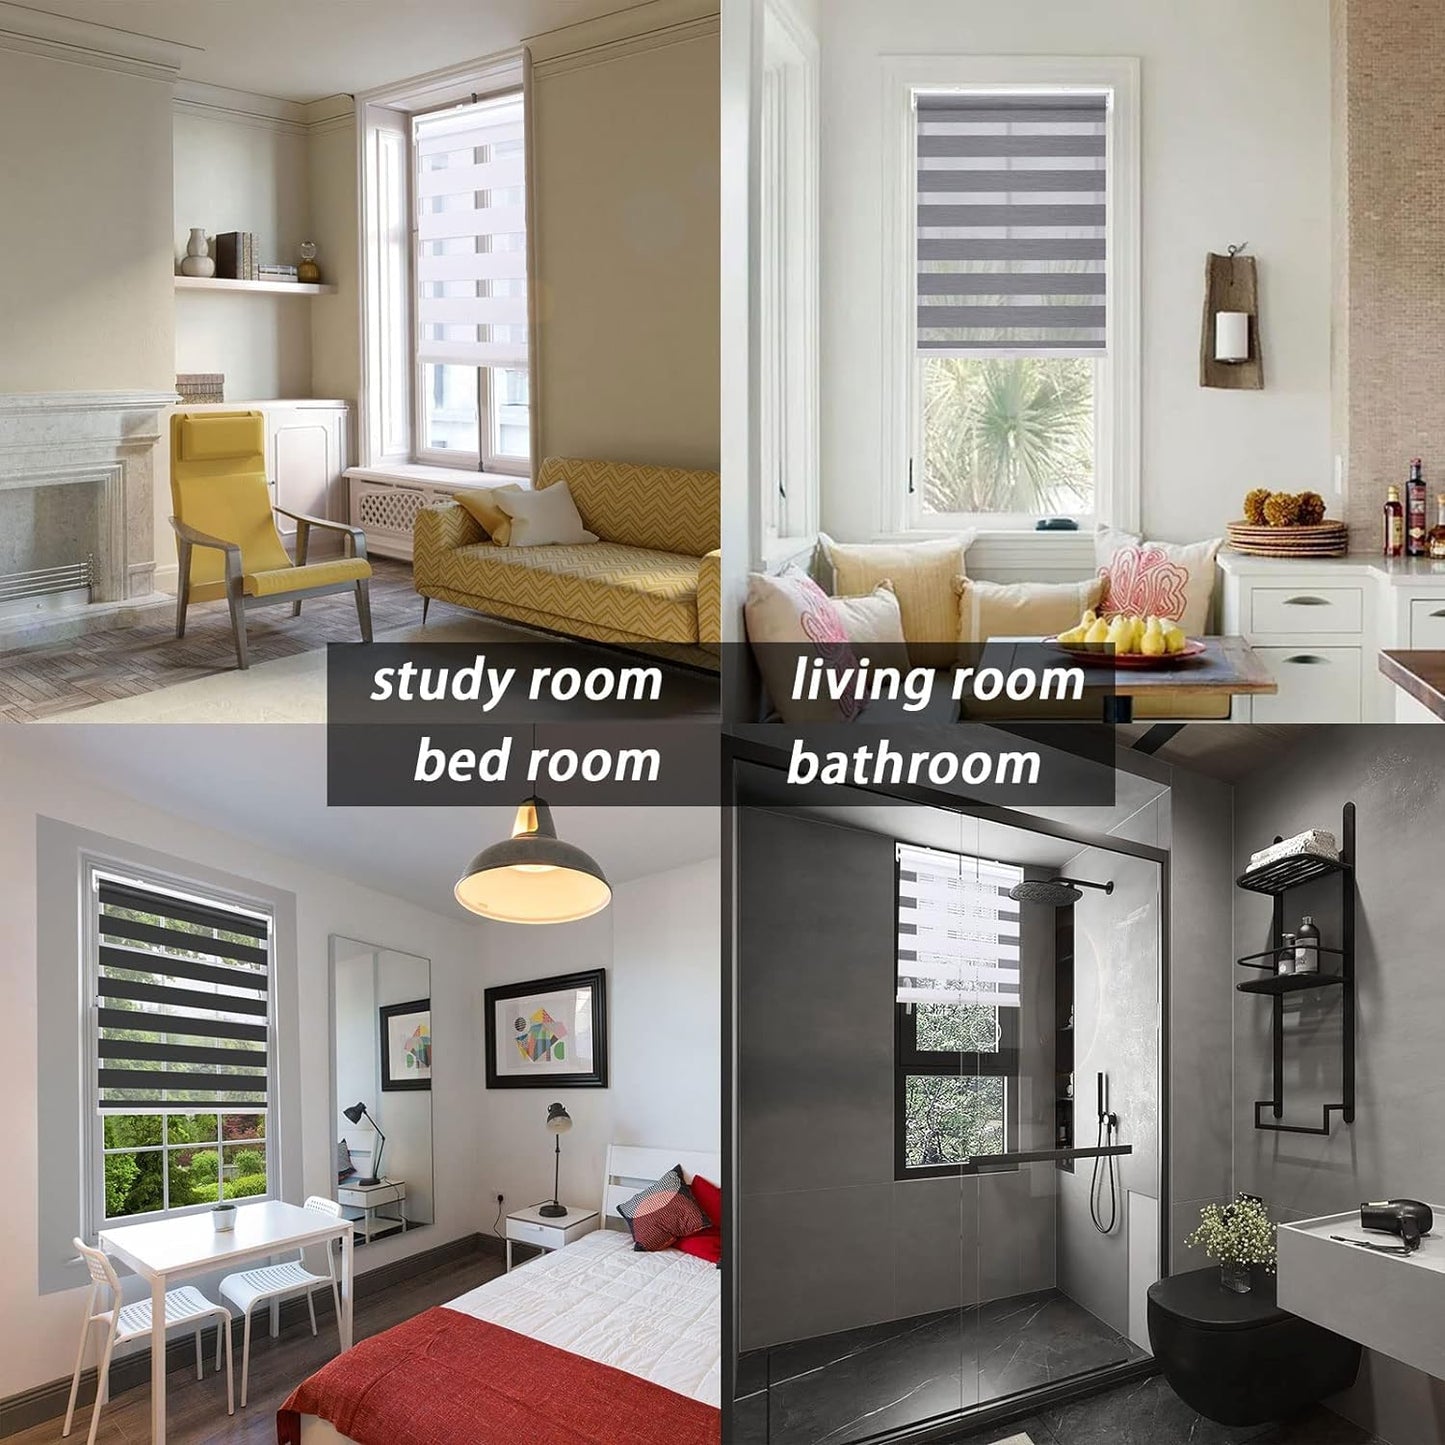 Zebra Blinds for Windows and Doors with Dual Shade, Light Control Blinds for Home & Office (Customized Size, 7005-Wood)